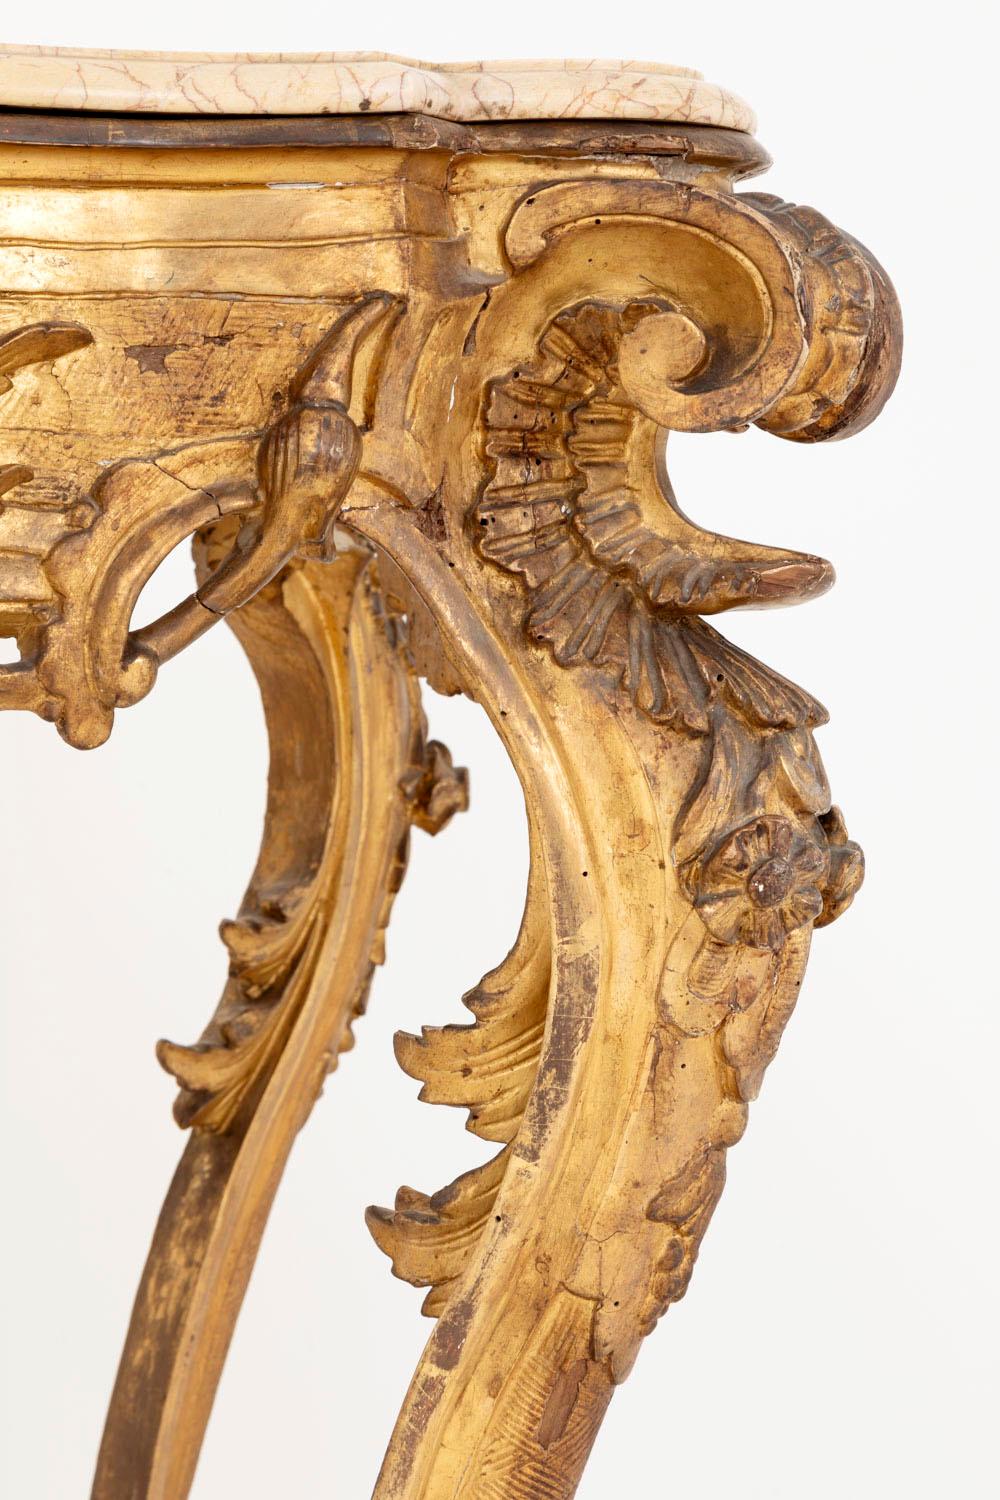 Louis XV style Italian console in carved and gilt wood, standing on four cabriole legs with lion paws shoes. The stretcher is adorned with scrolls finishing in circular element and supporting a flower vase. Curved apron decorated with flowers,